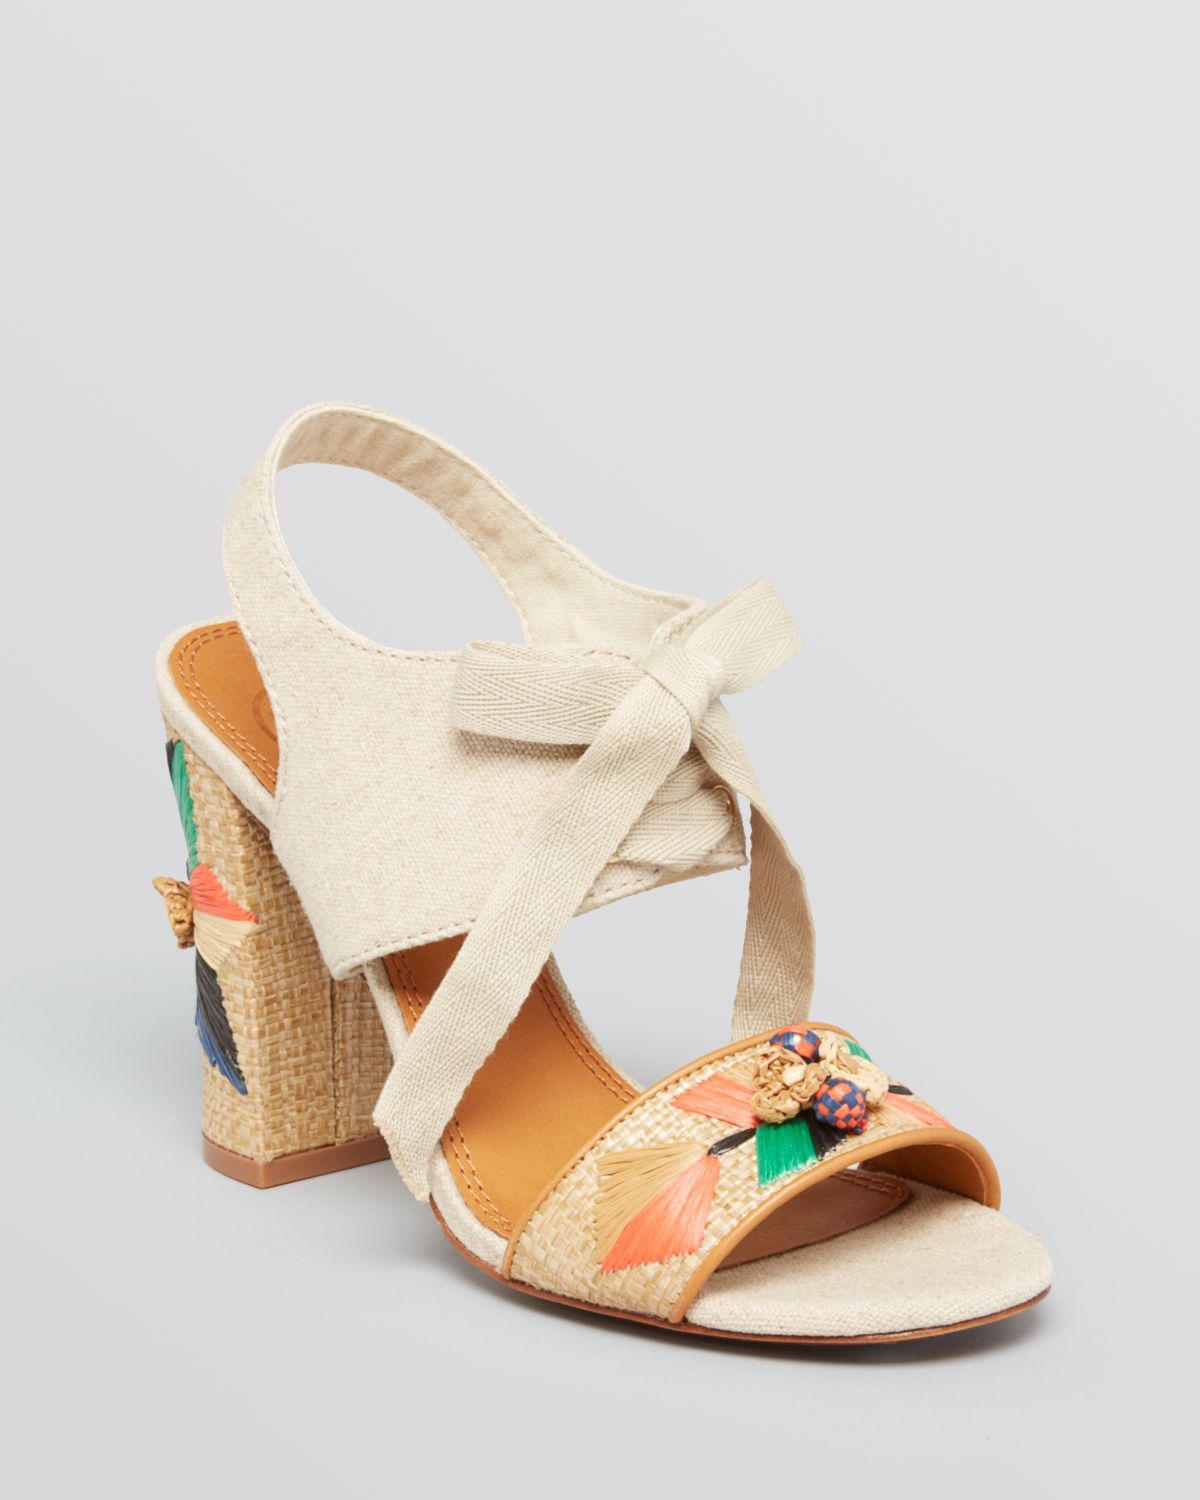 Lyst - Chloé Chloé Jamie Strappy Sandals in Natural